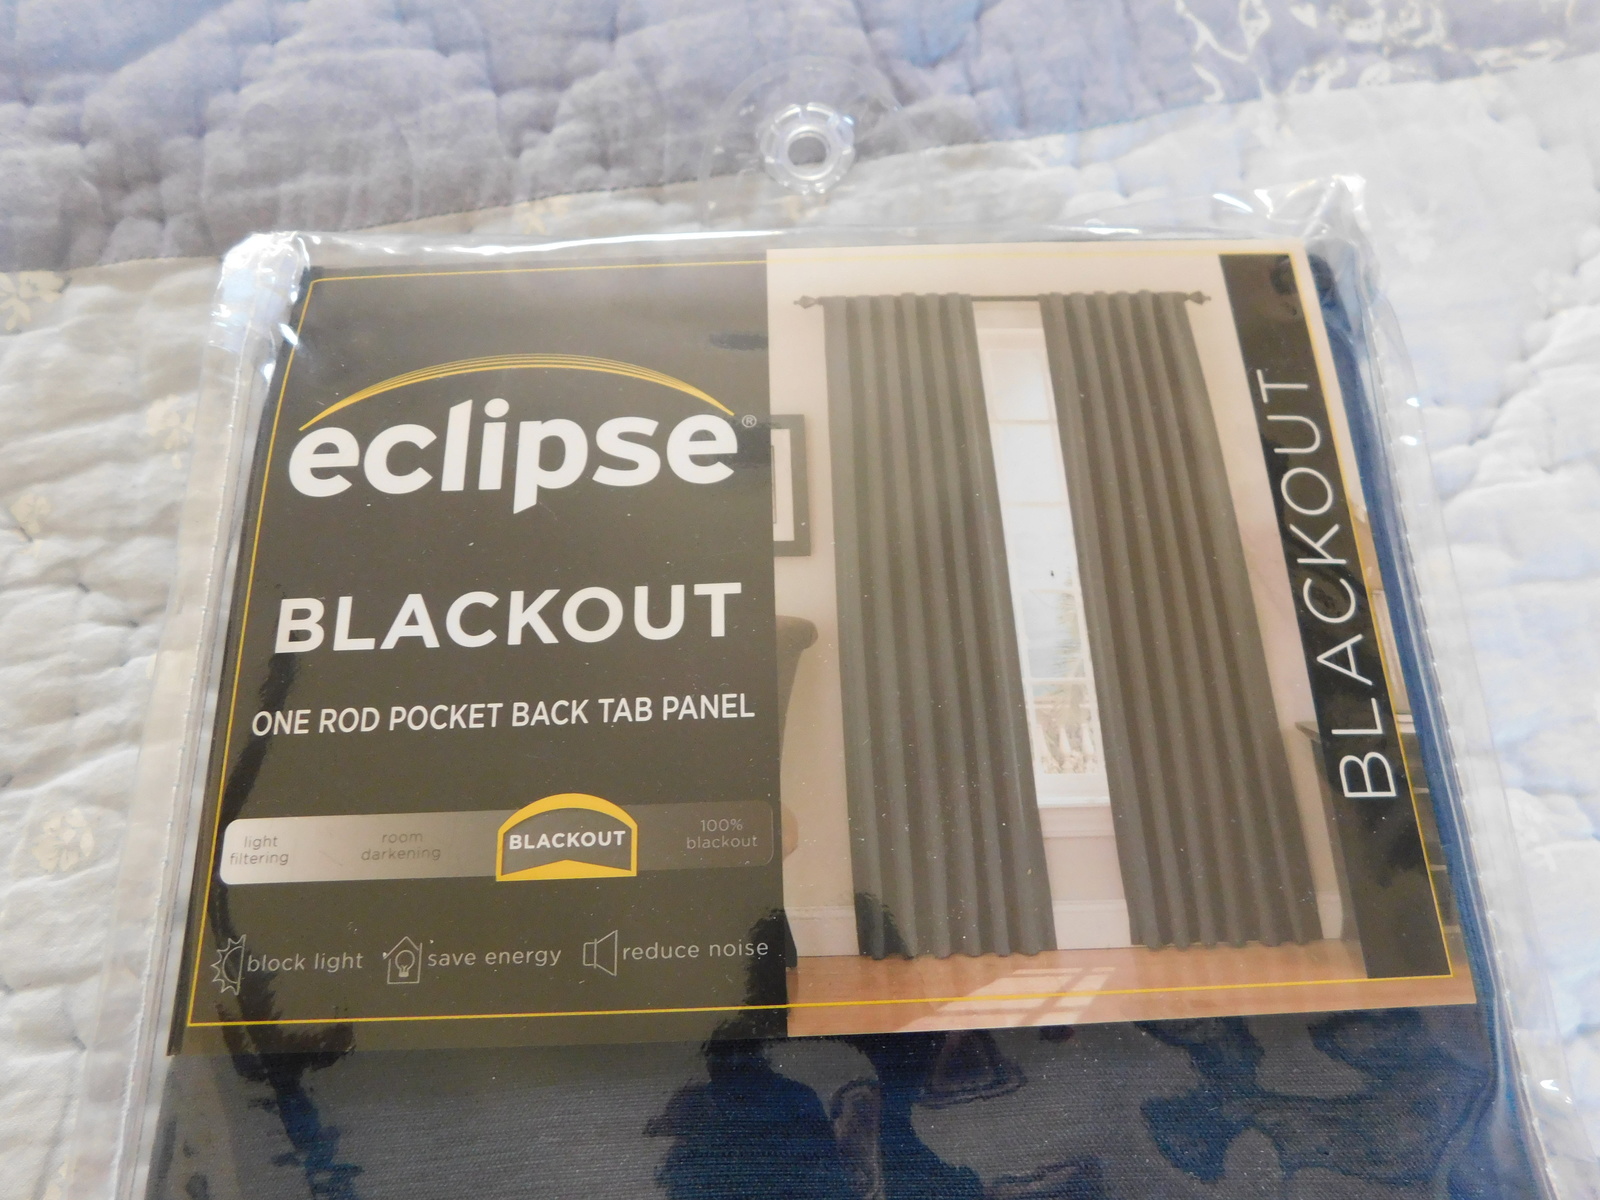 Eclipse blackout curtains, set of 6 individual panels, each panel 52"x95"  - $170.00